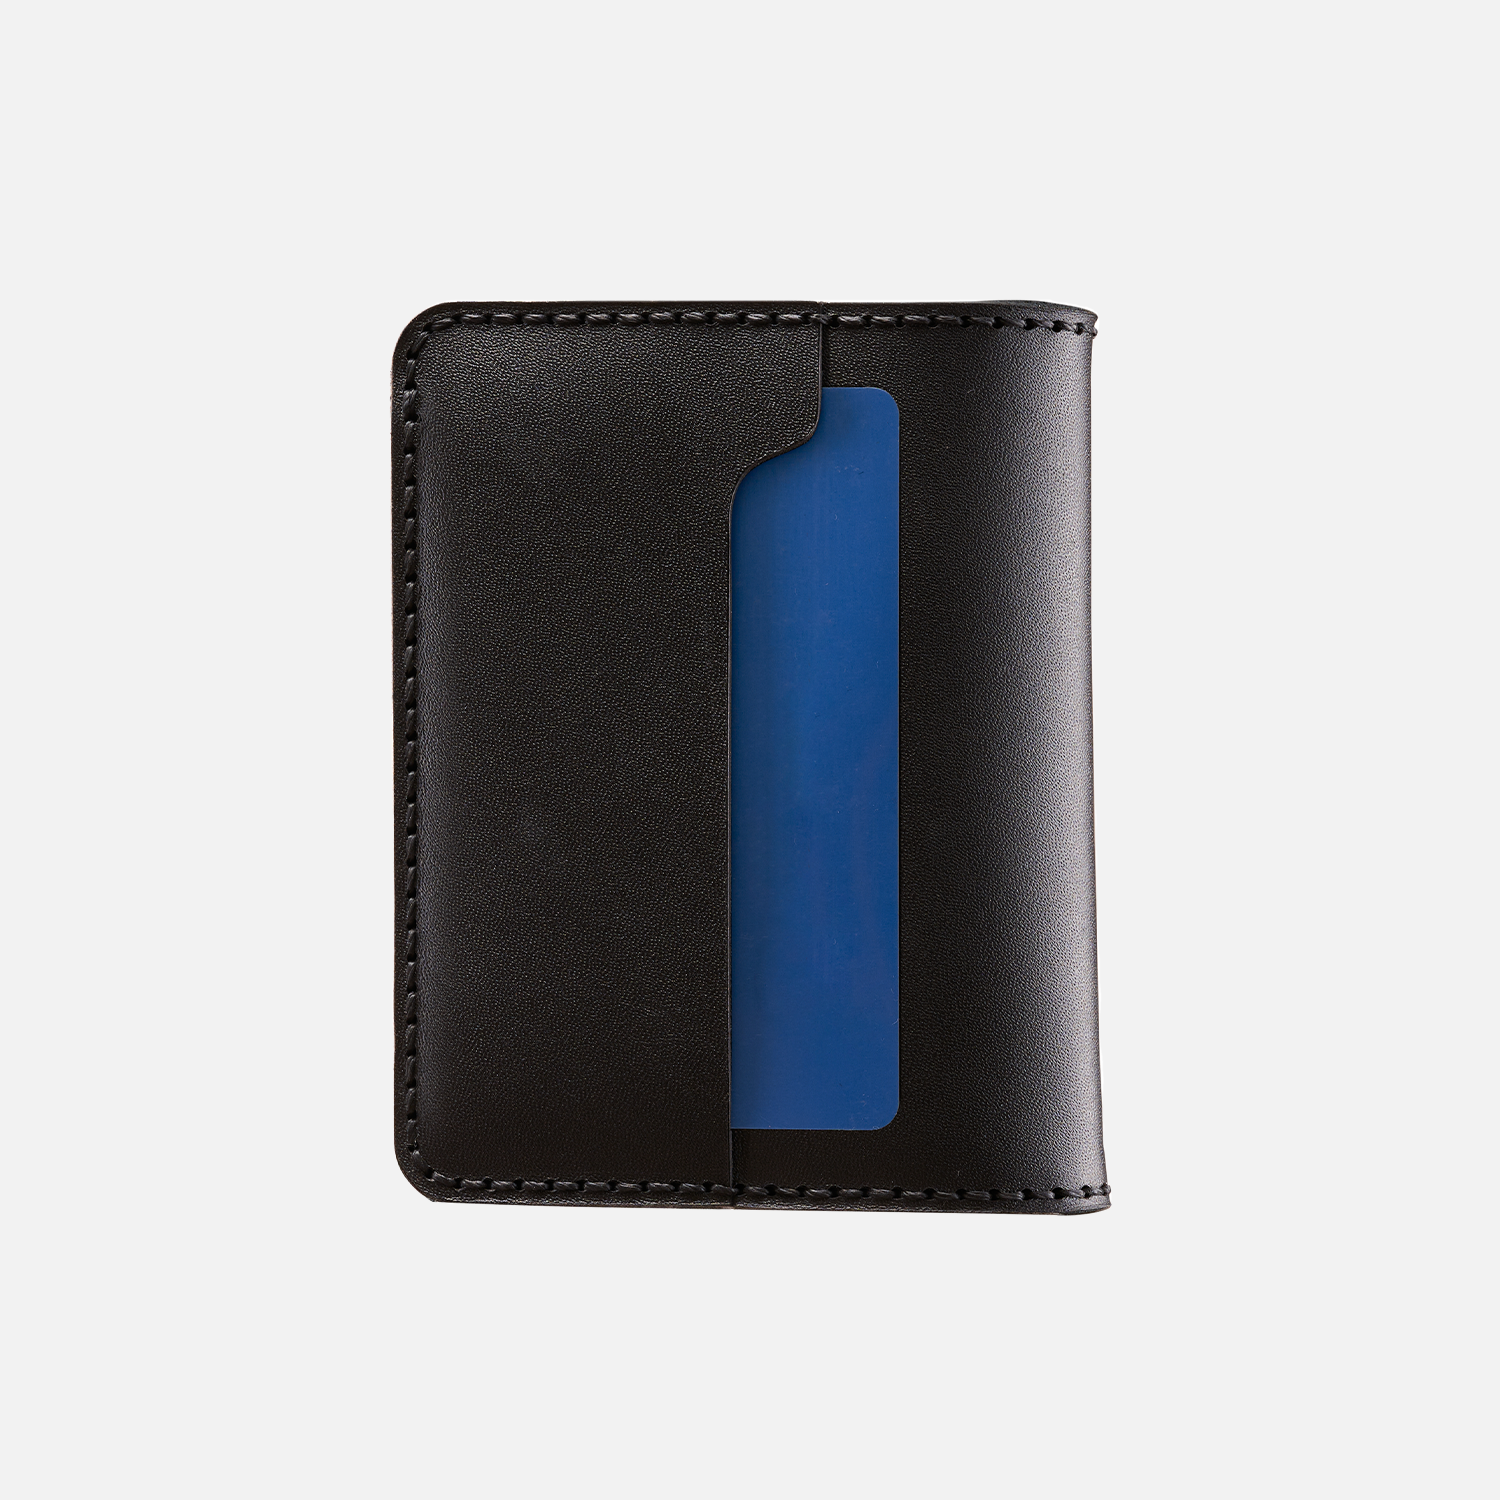 Black leather bifold wallet with blue card isolated on white background.